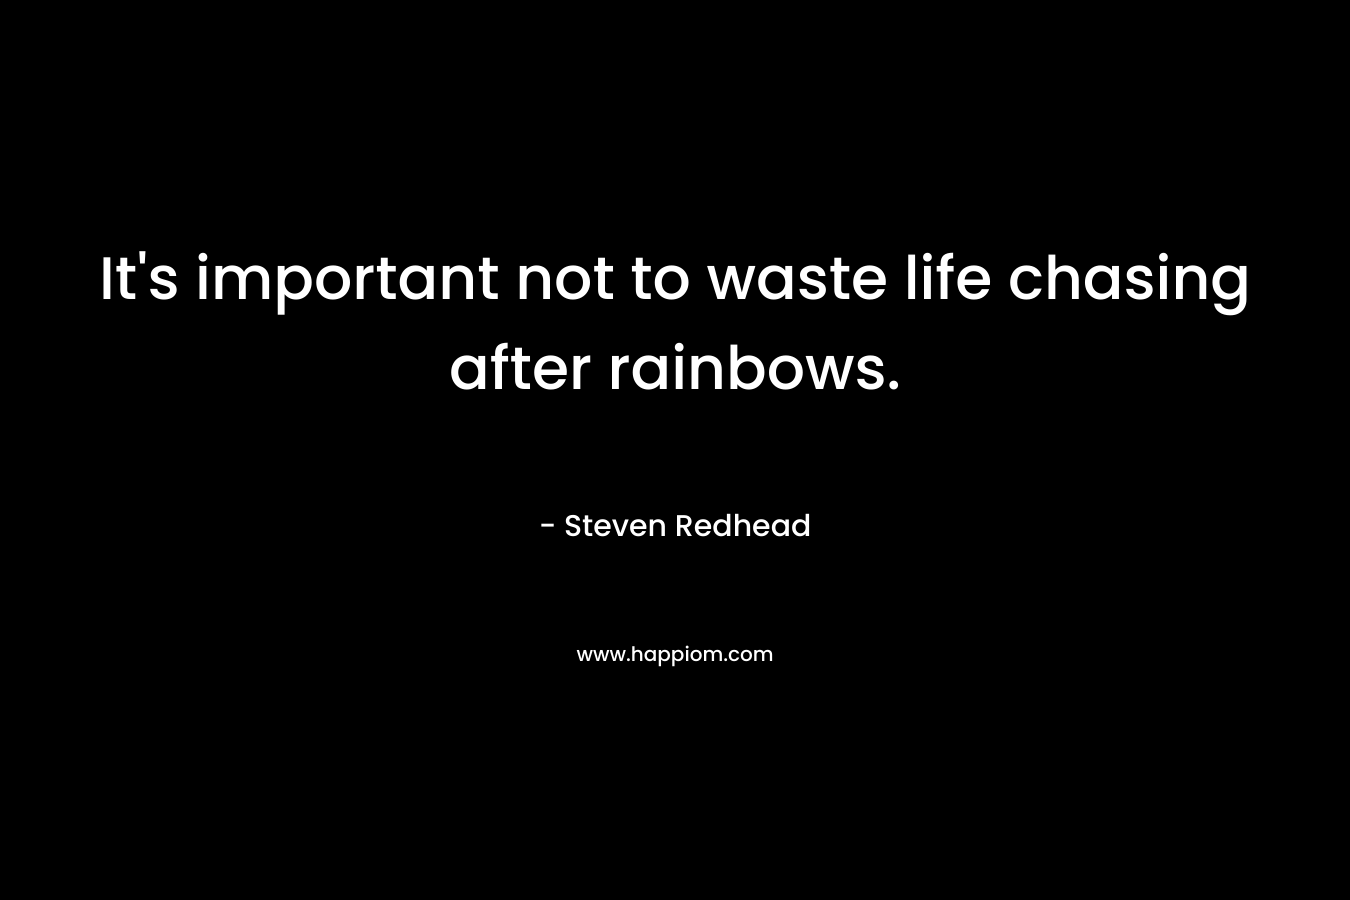 It's important not to waste life chasing after rainbows.